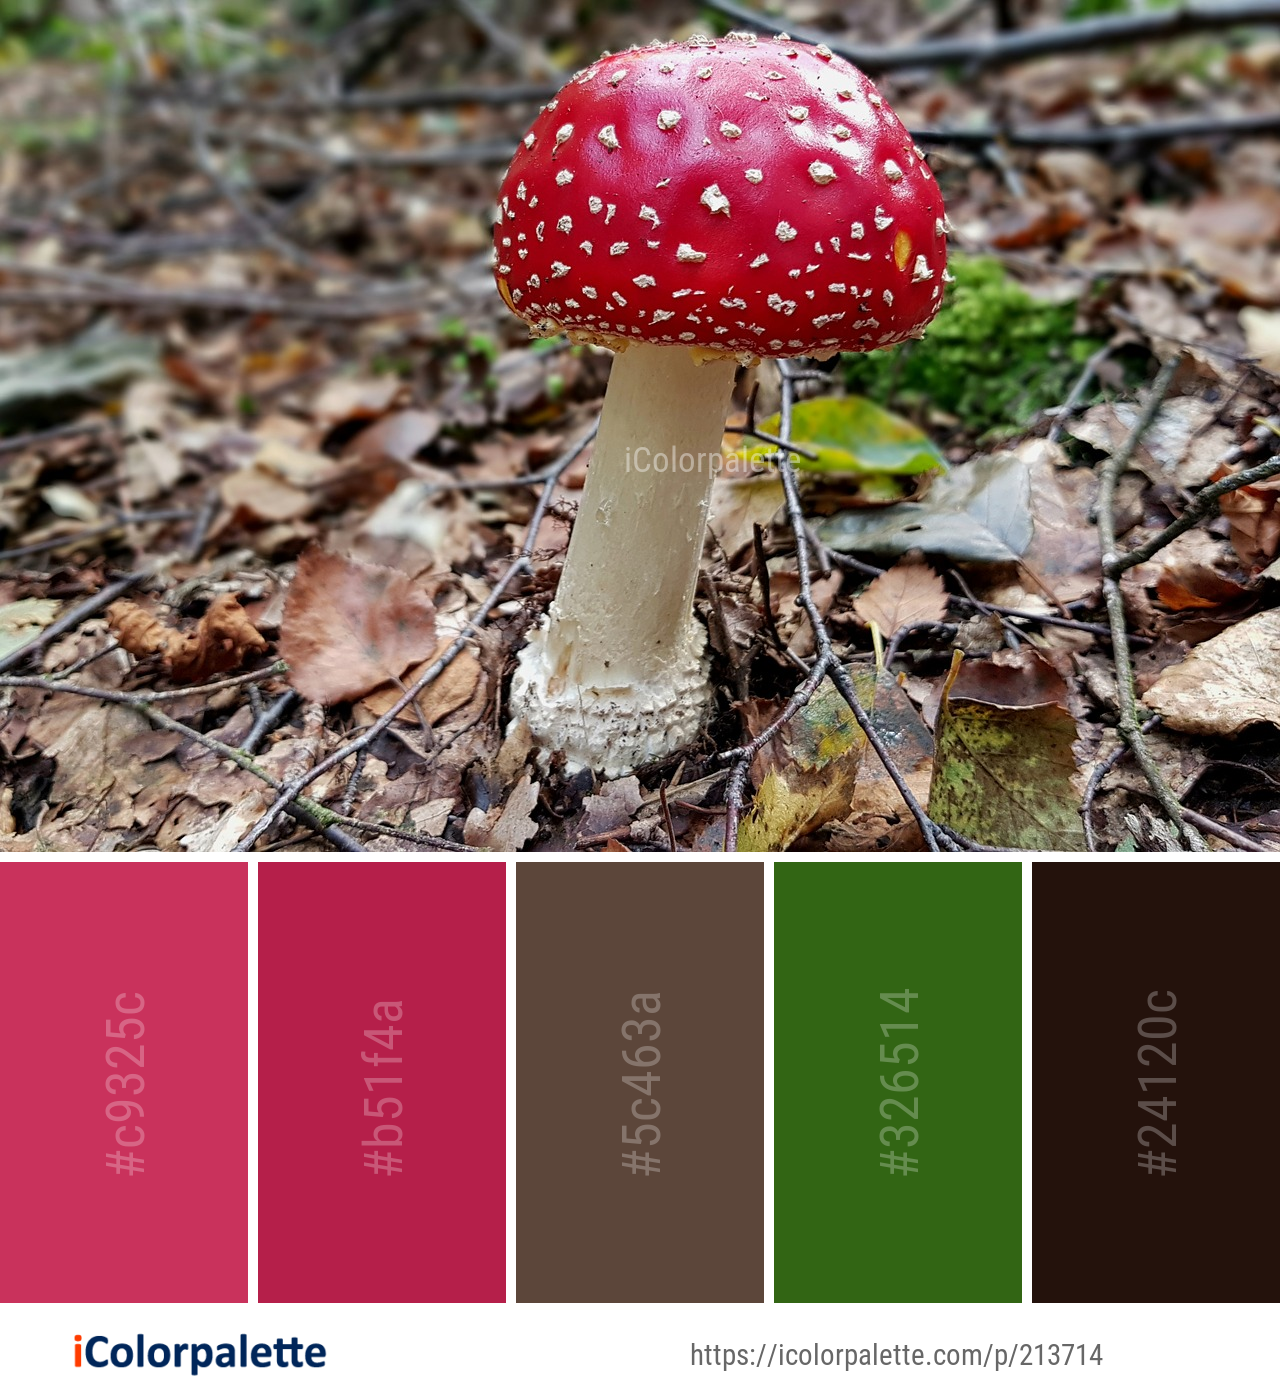 Color Palette Ideas from Mushroom Fungus Agaric Image | iColorpalette